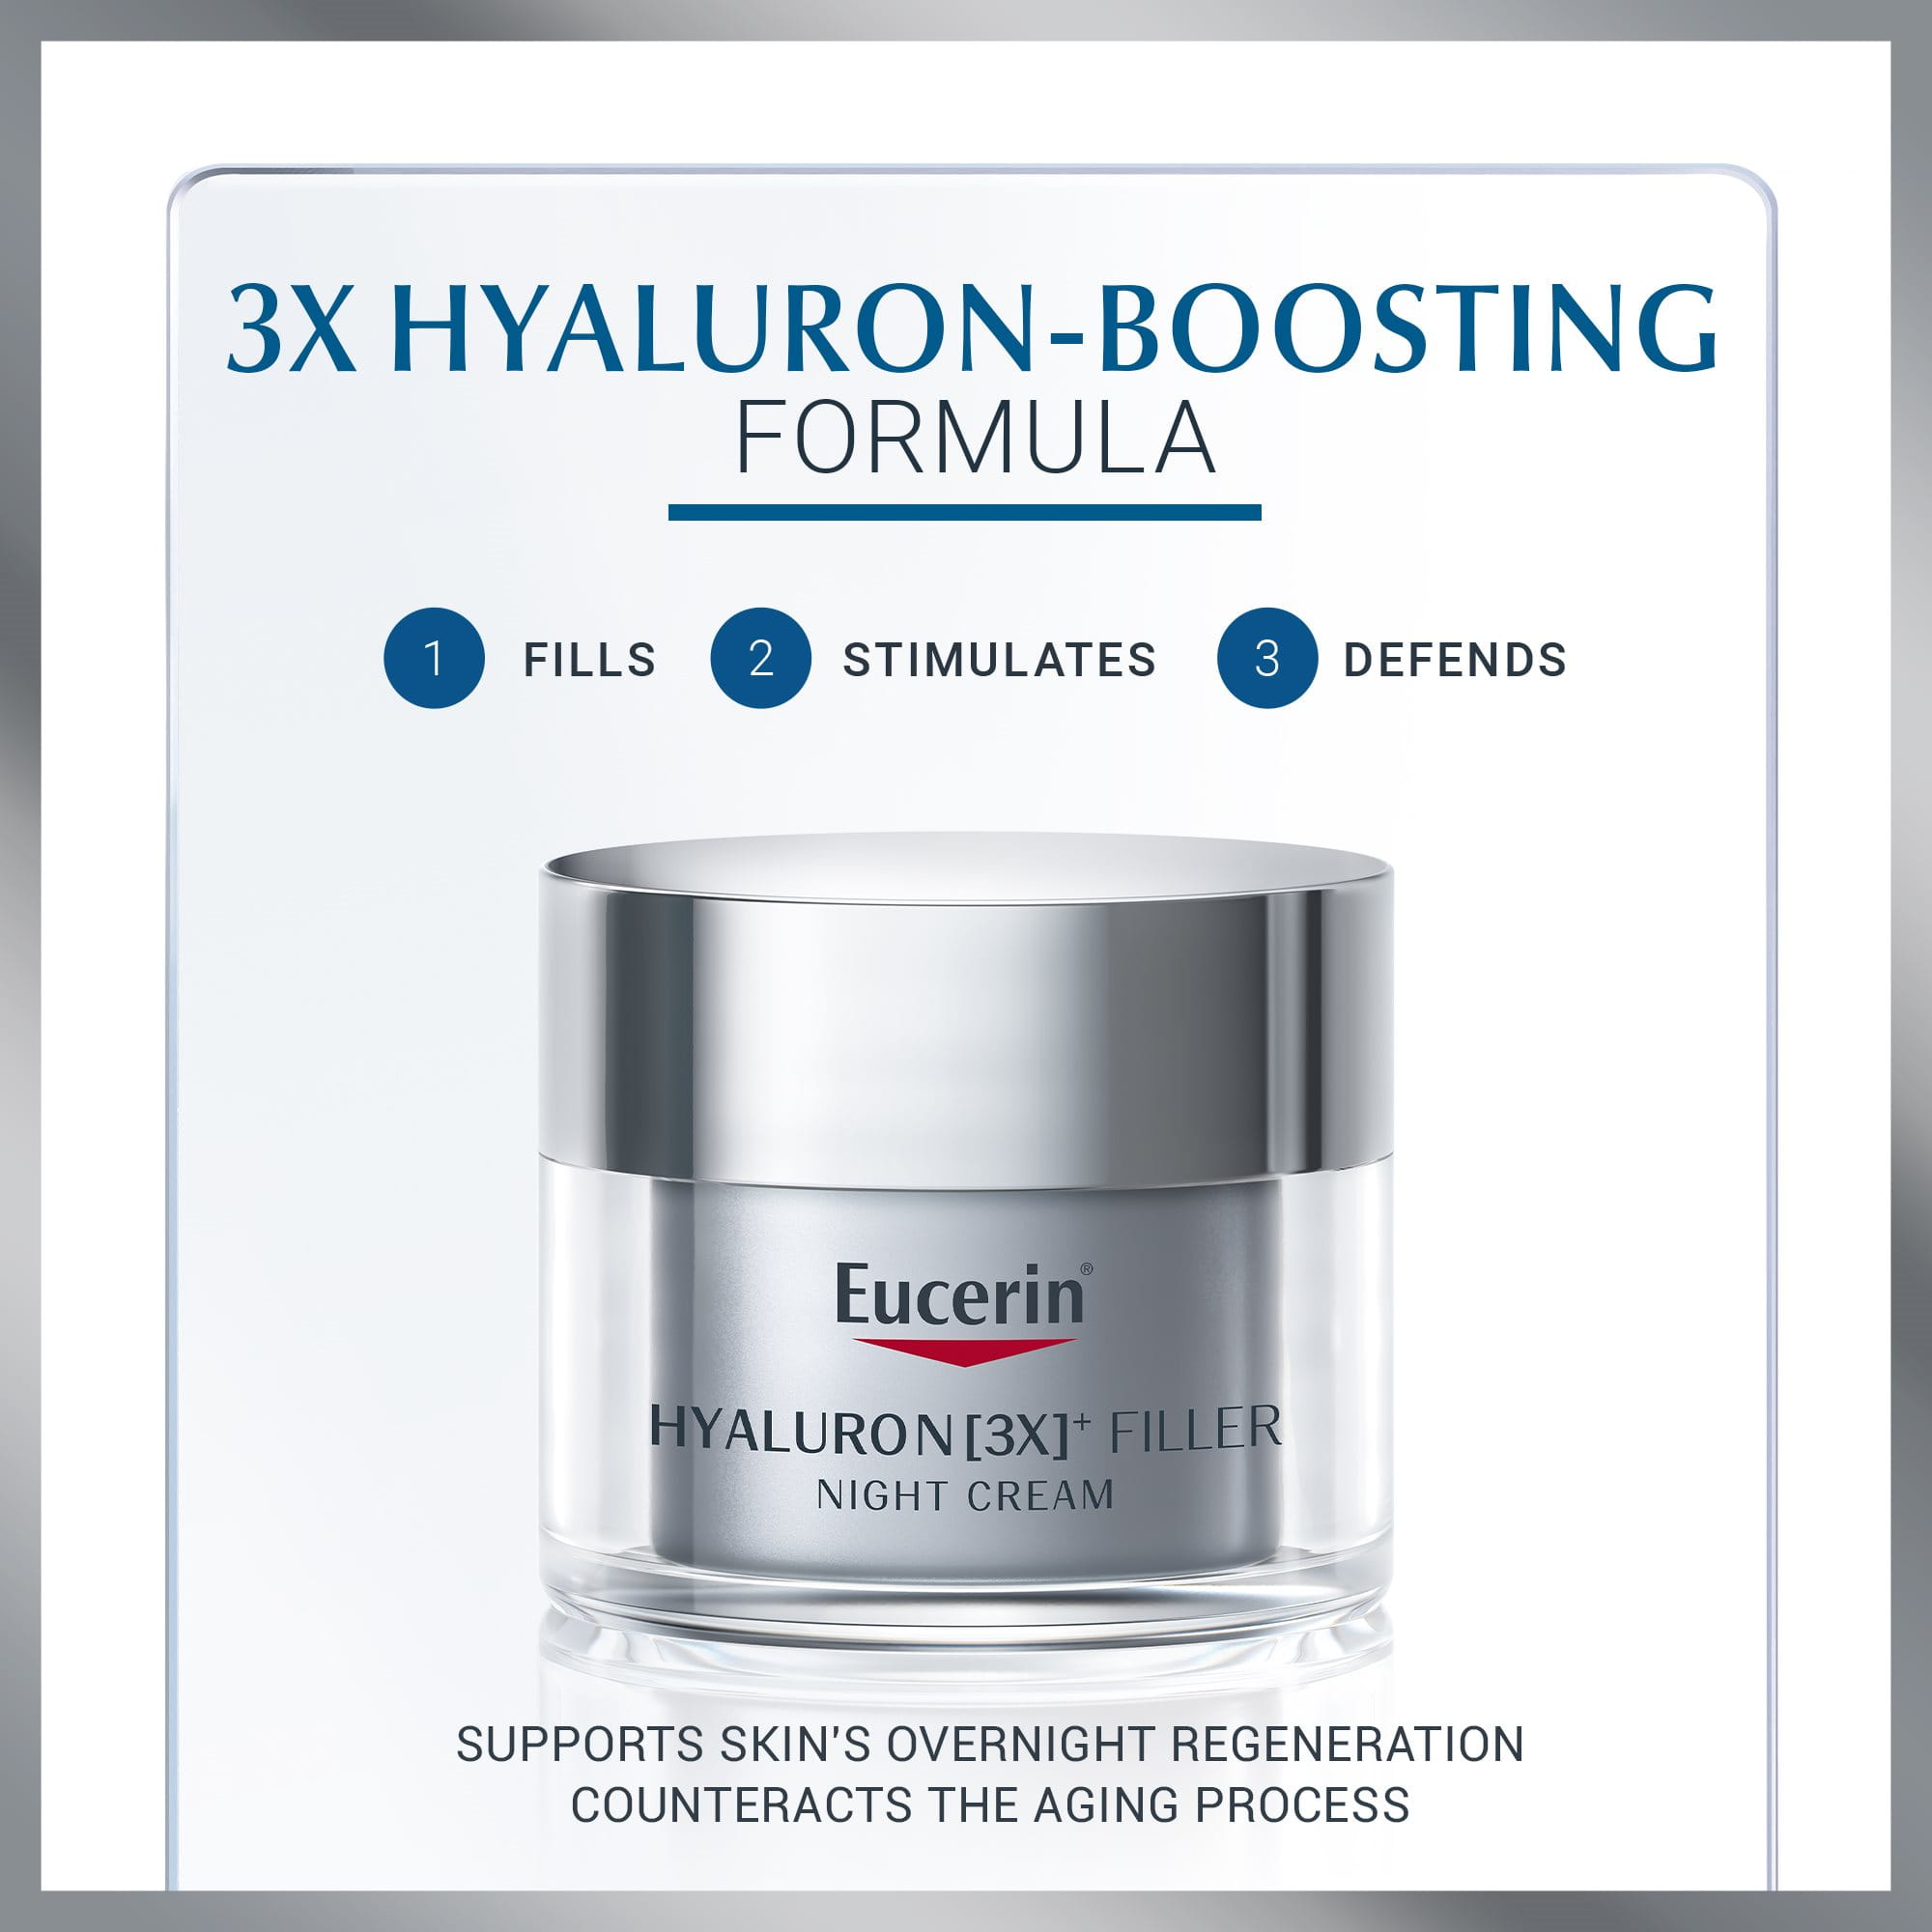 How to use Hyaluron Filler Night Cream